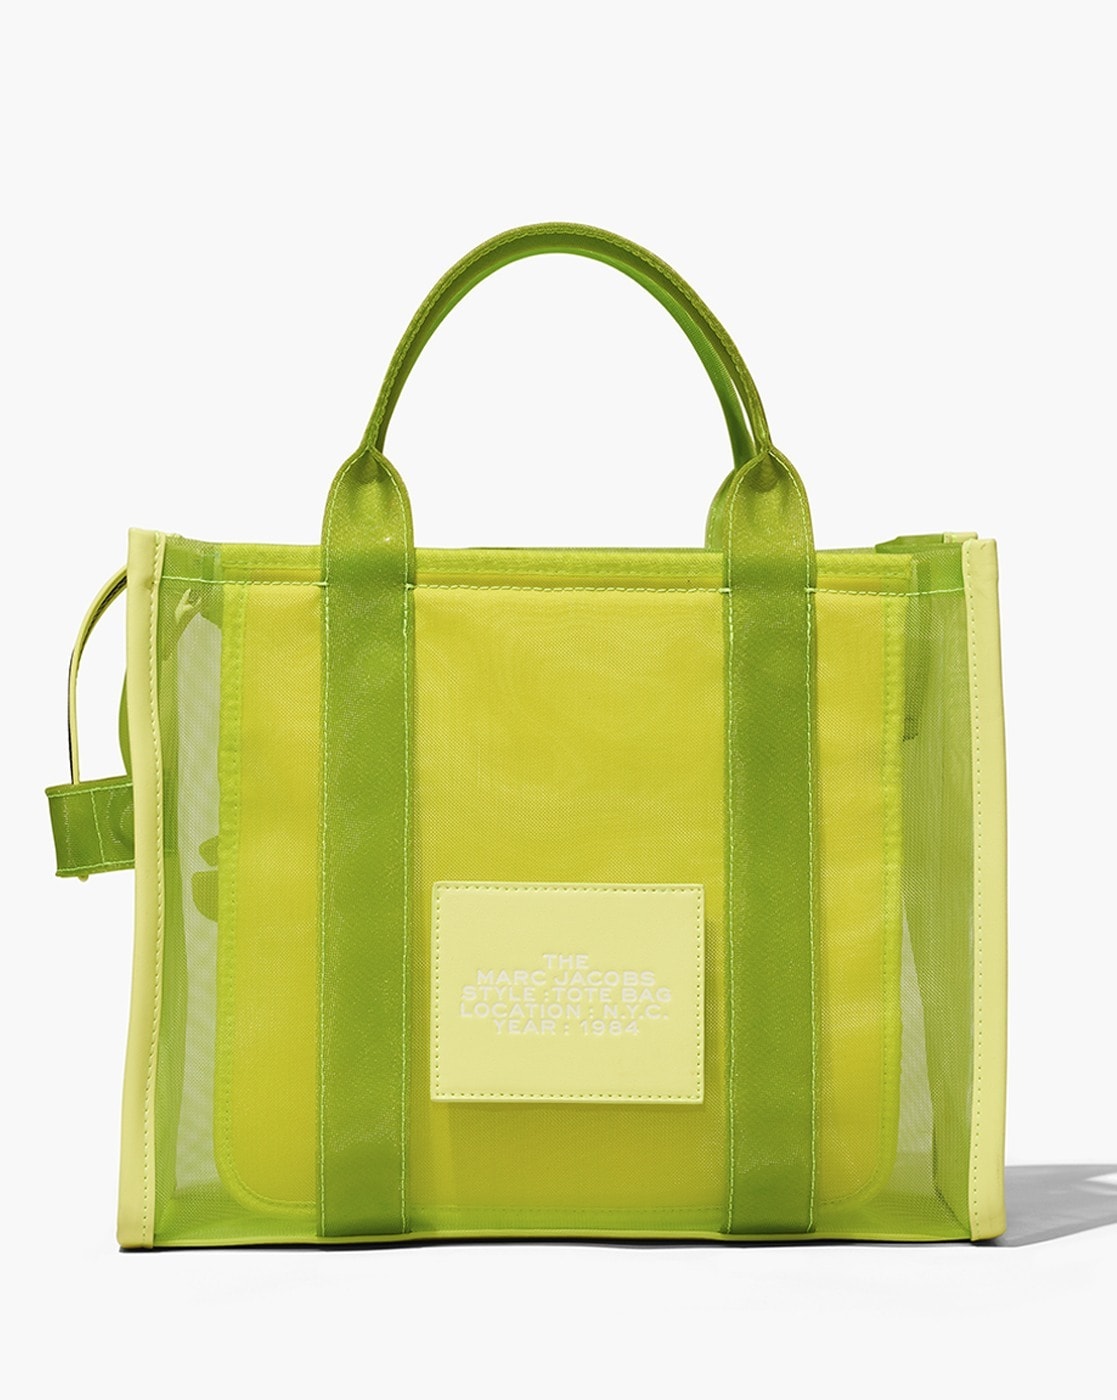 WHATS IN MY BAG, MARC JACOBS THE TOTE BAG GREEN MESH, THE TOTE BAG SMALL  WHAT IT FITS